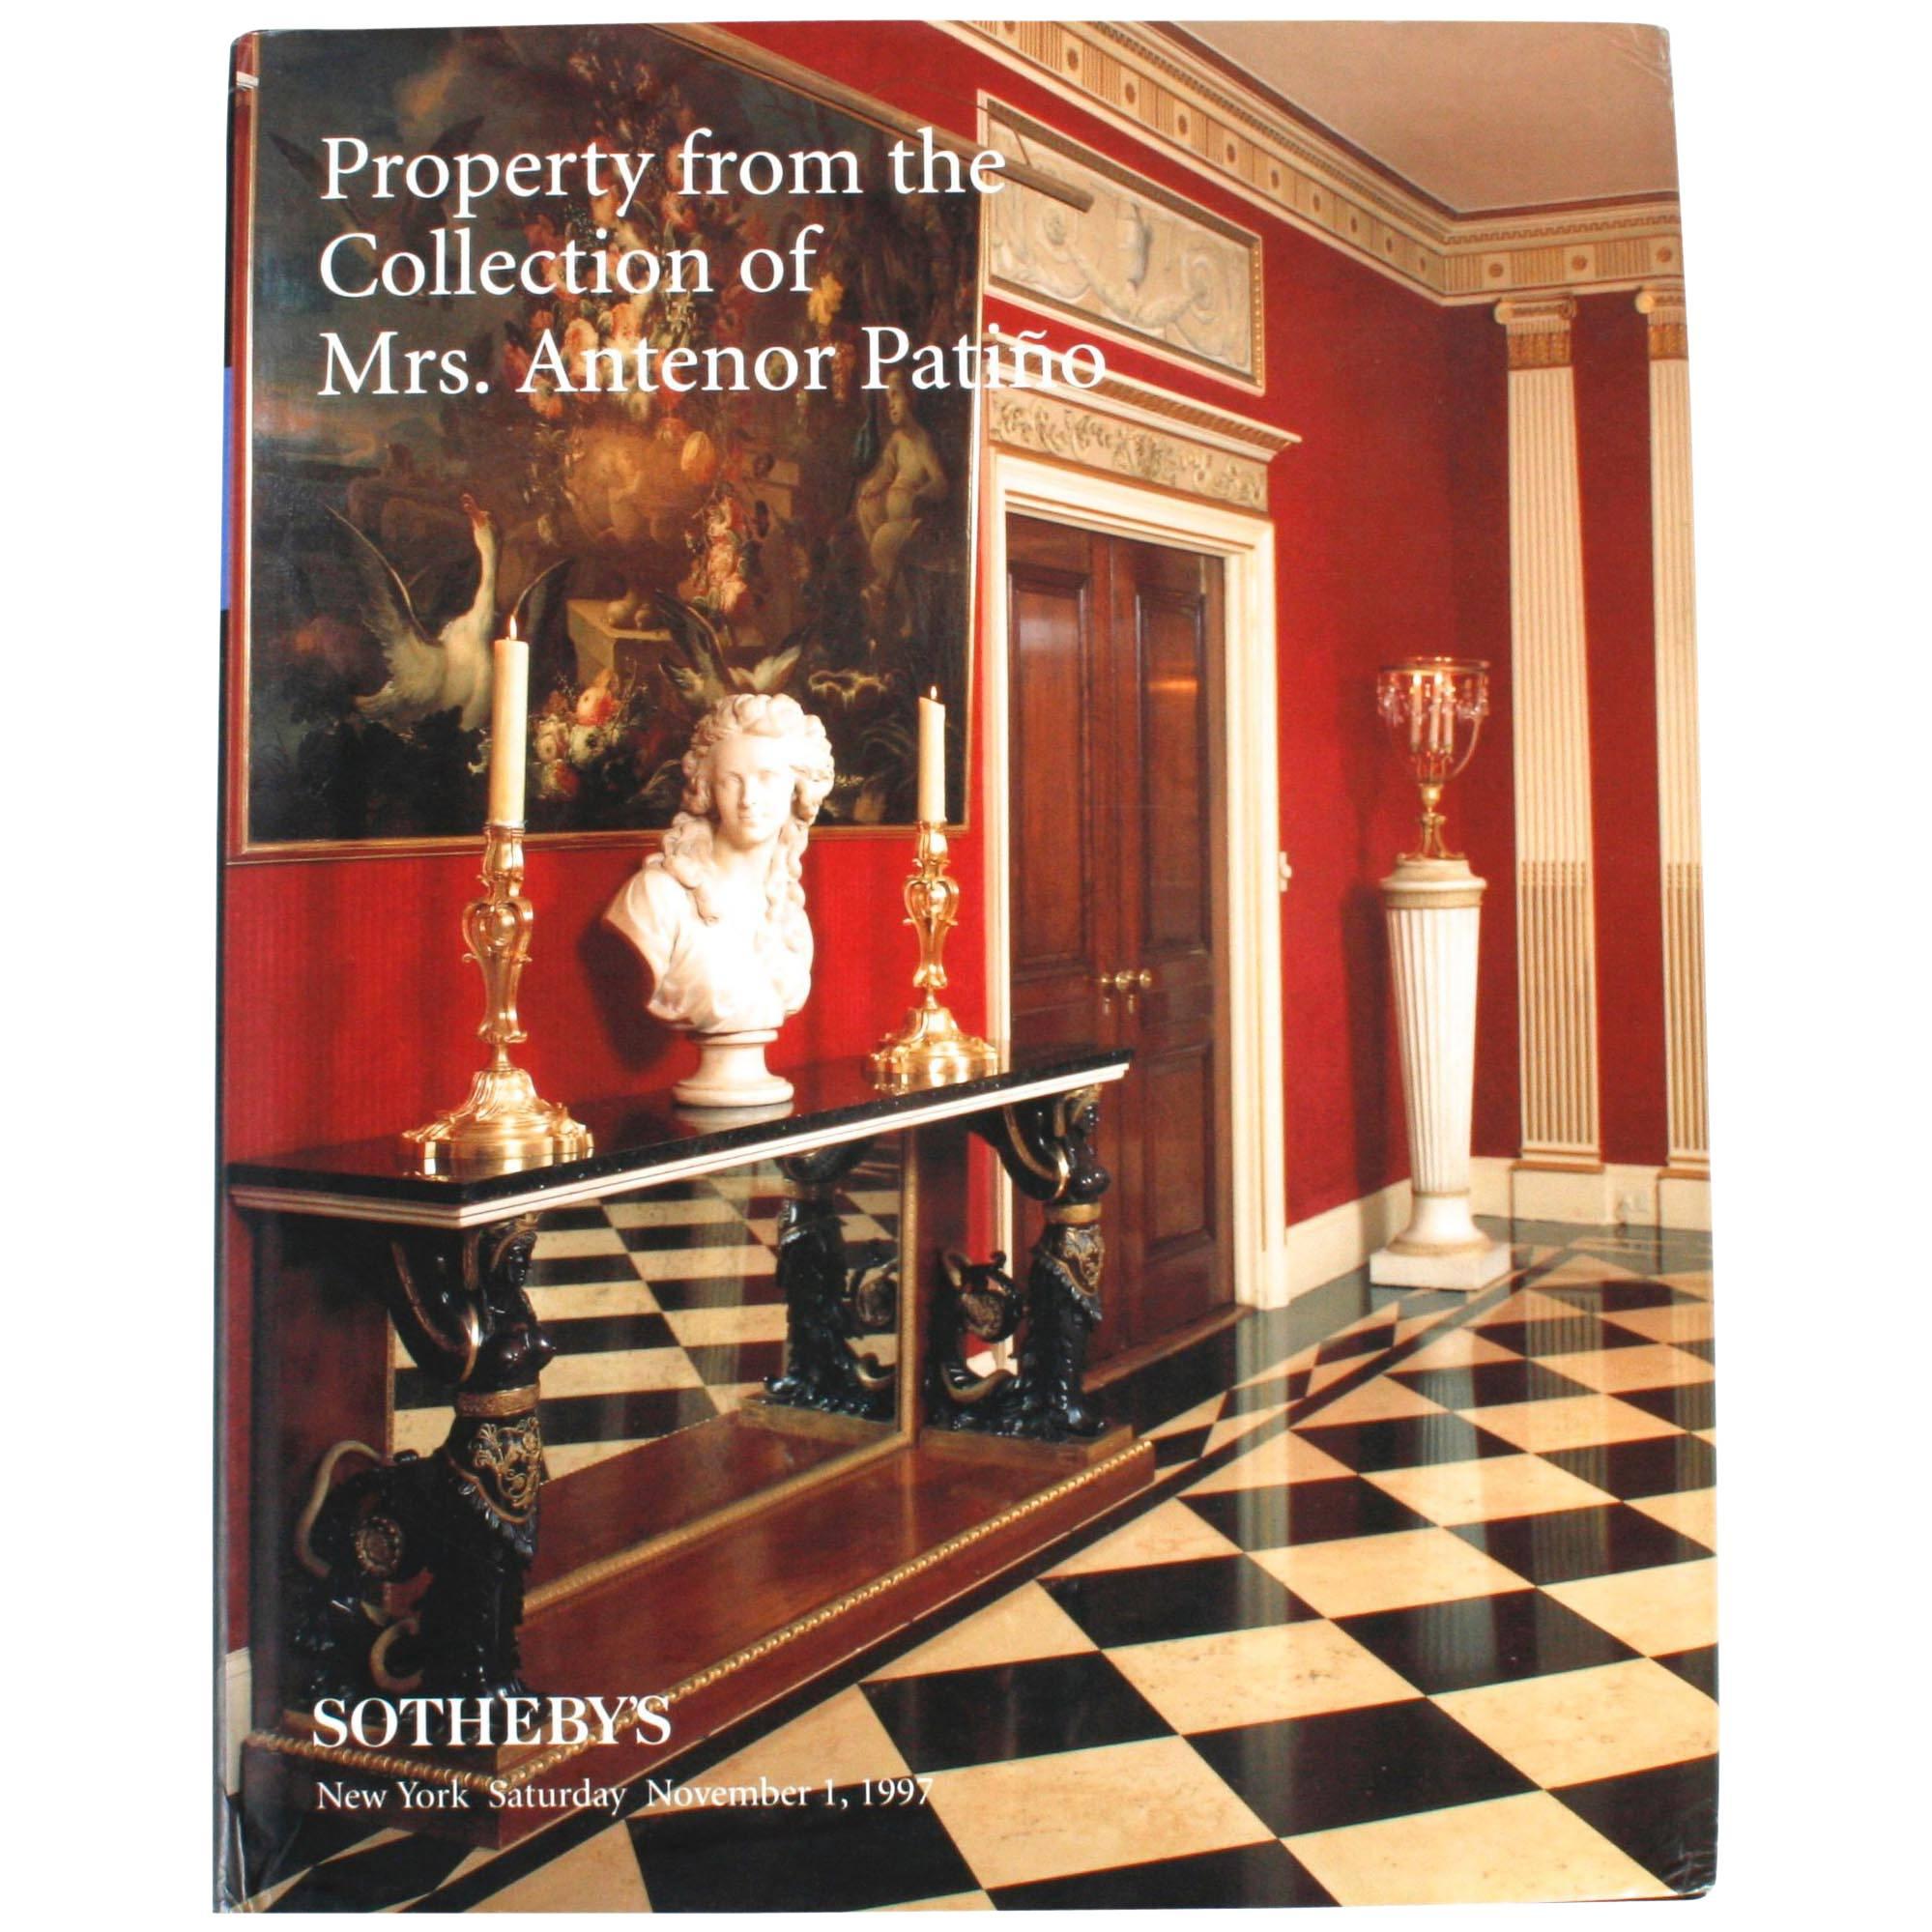 Sotheby's Auction Catalogue: Property from the Collection of Mrs. Antenor Patiño